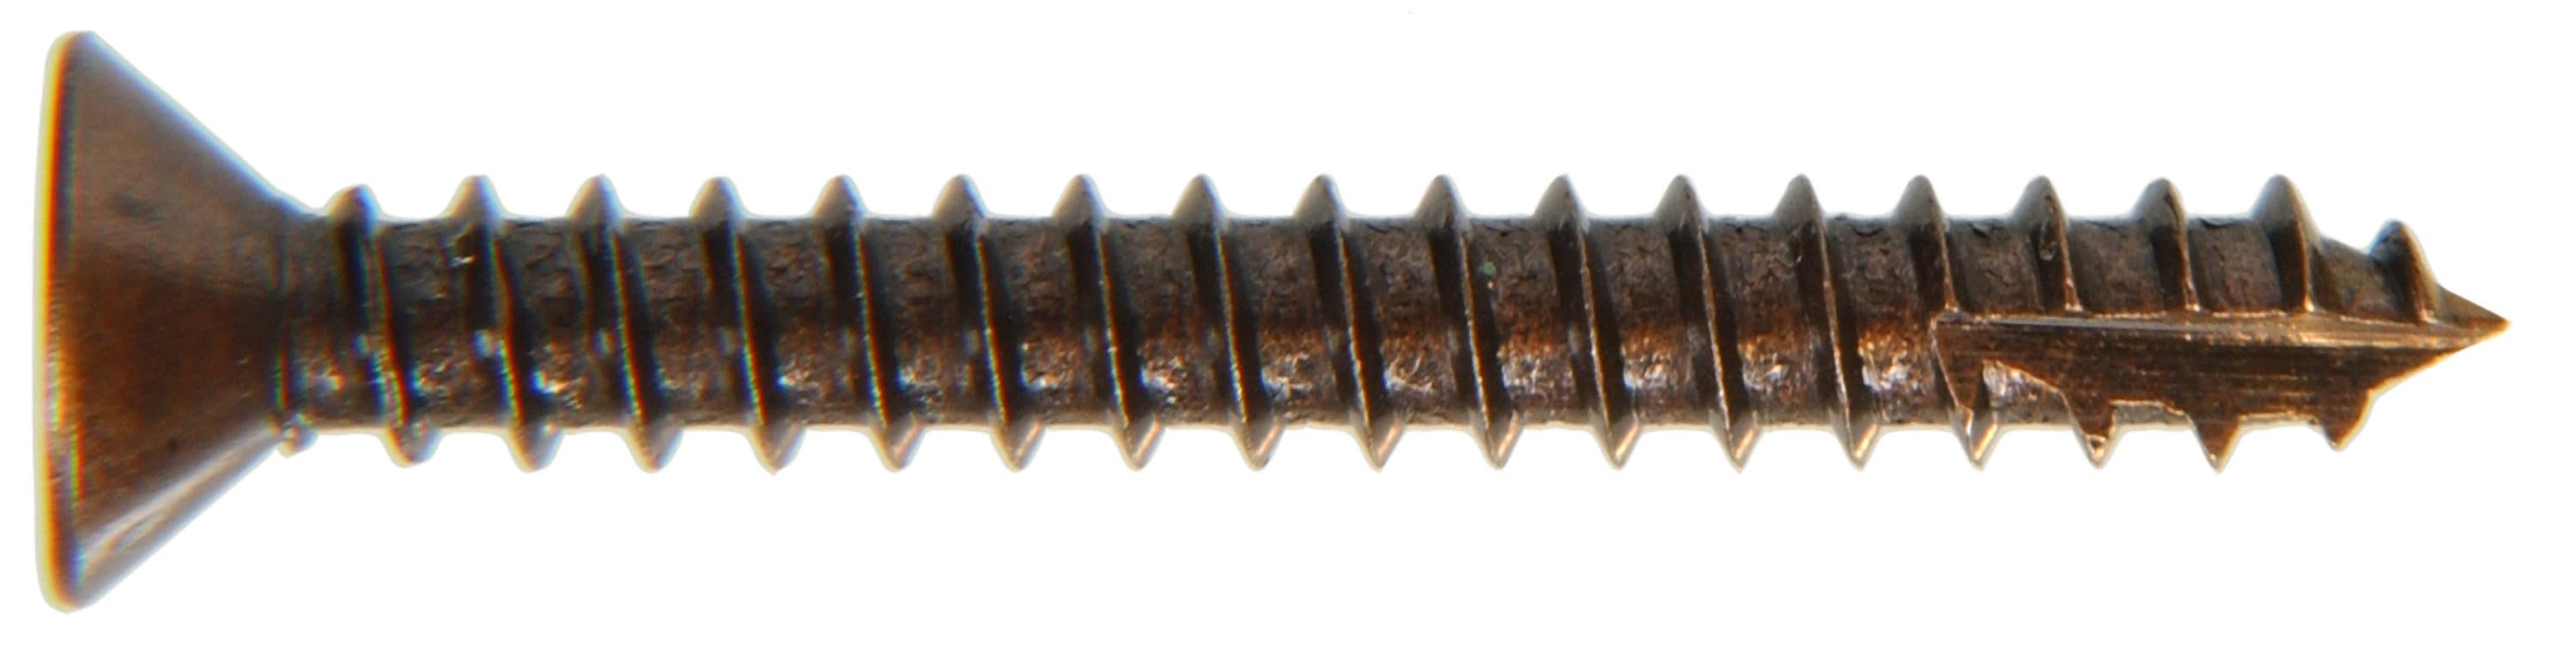 50-Pack Antique Bronze The Hillman Group 45361 5-Inch x 5/8-Inch Flat Phillips Wood Screw